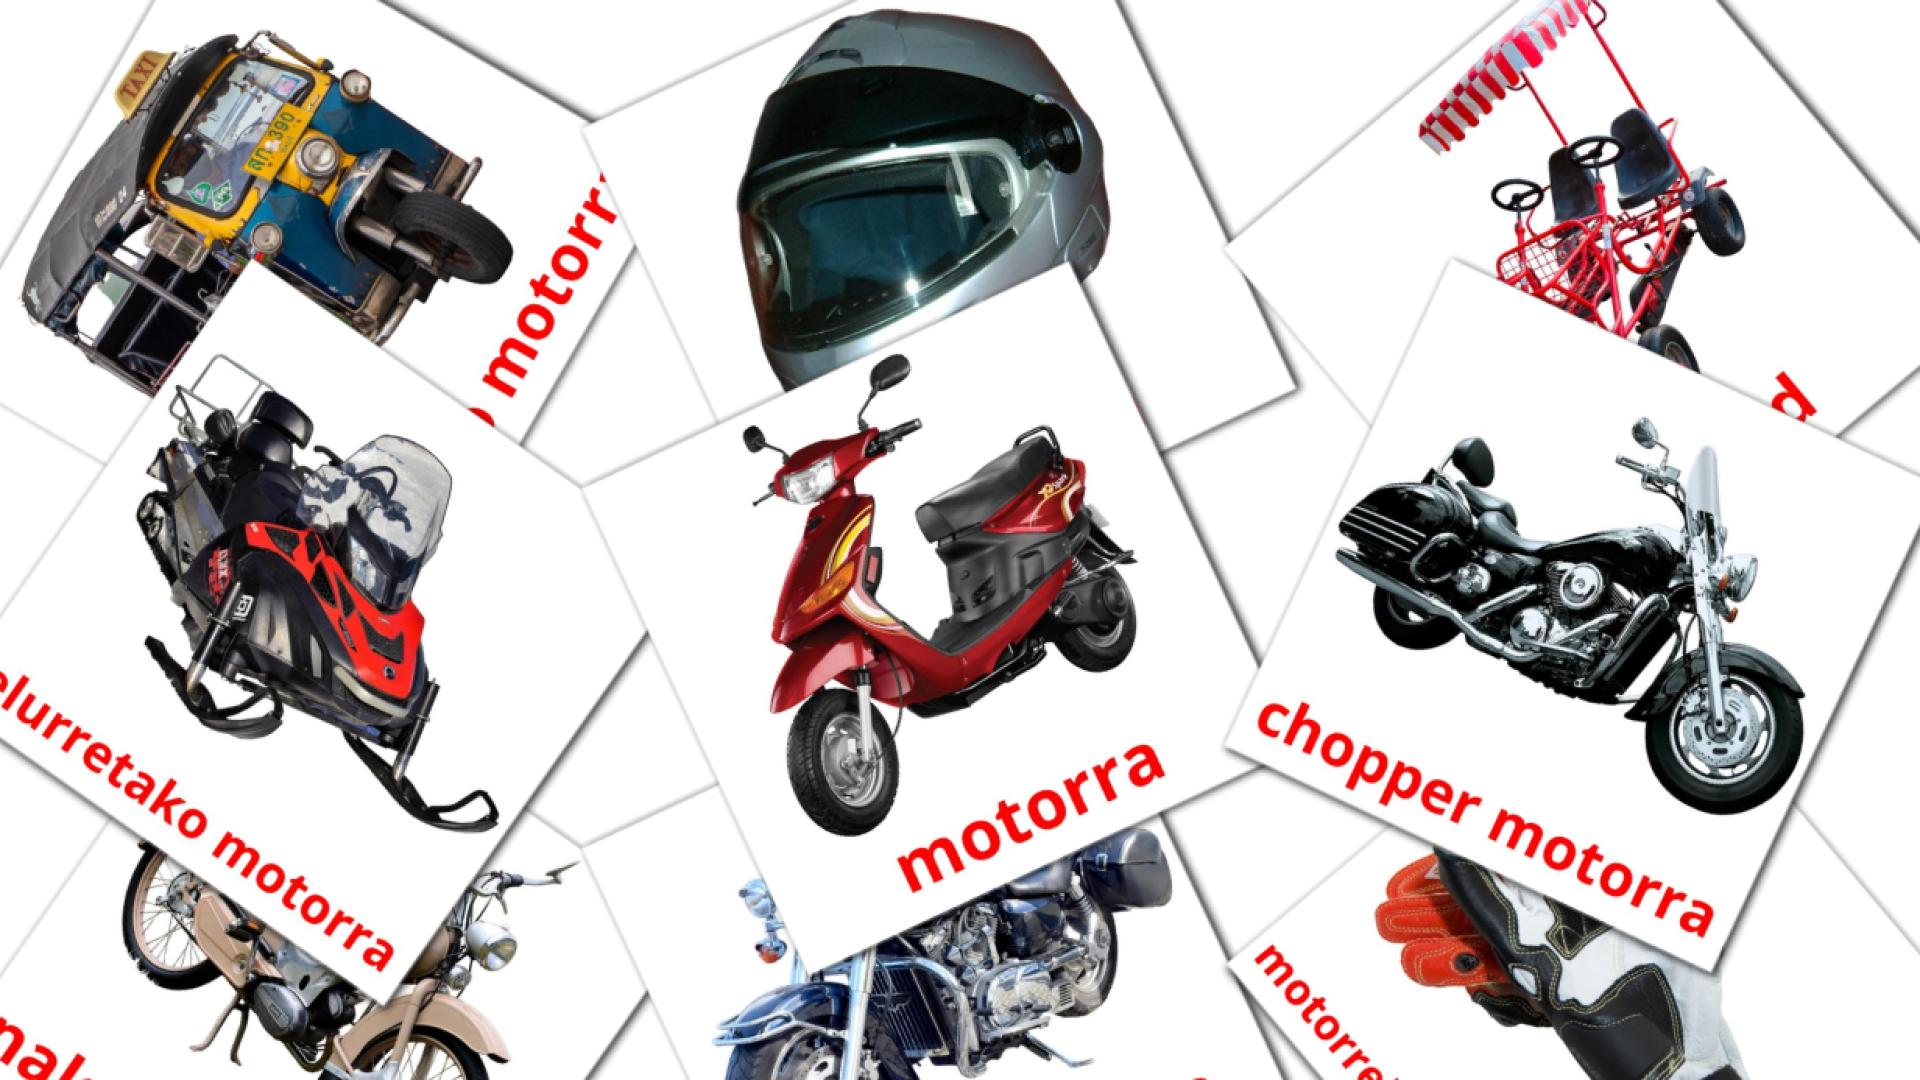 Motorcycles - basque vocabulary cards